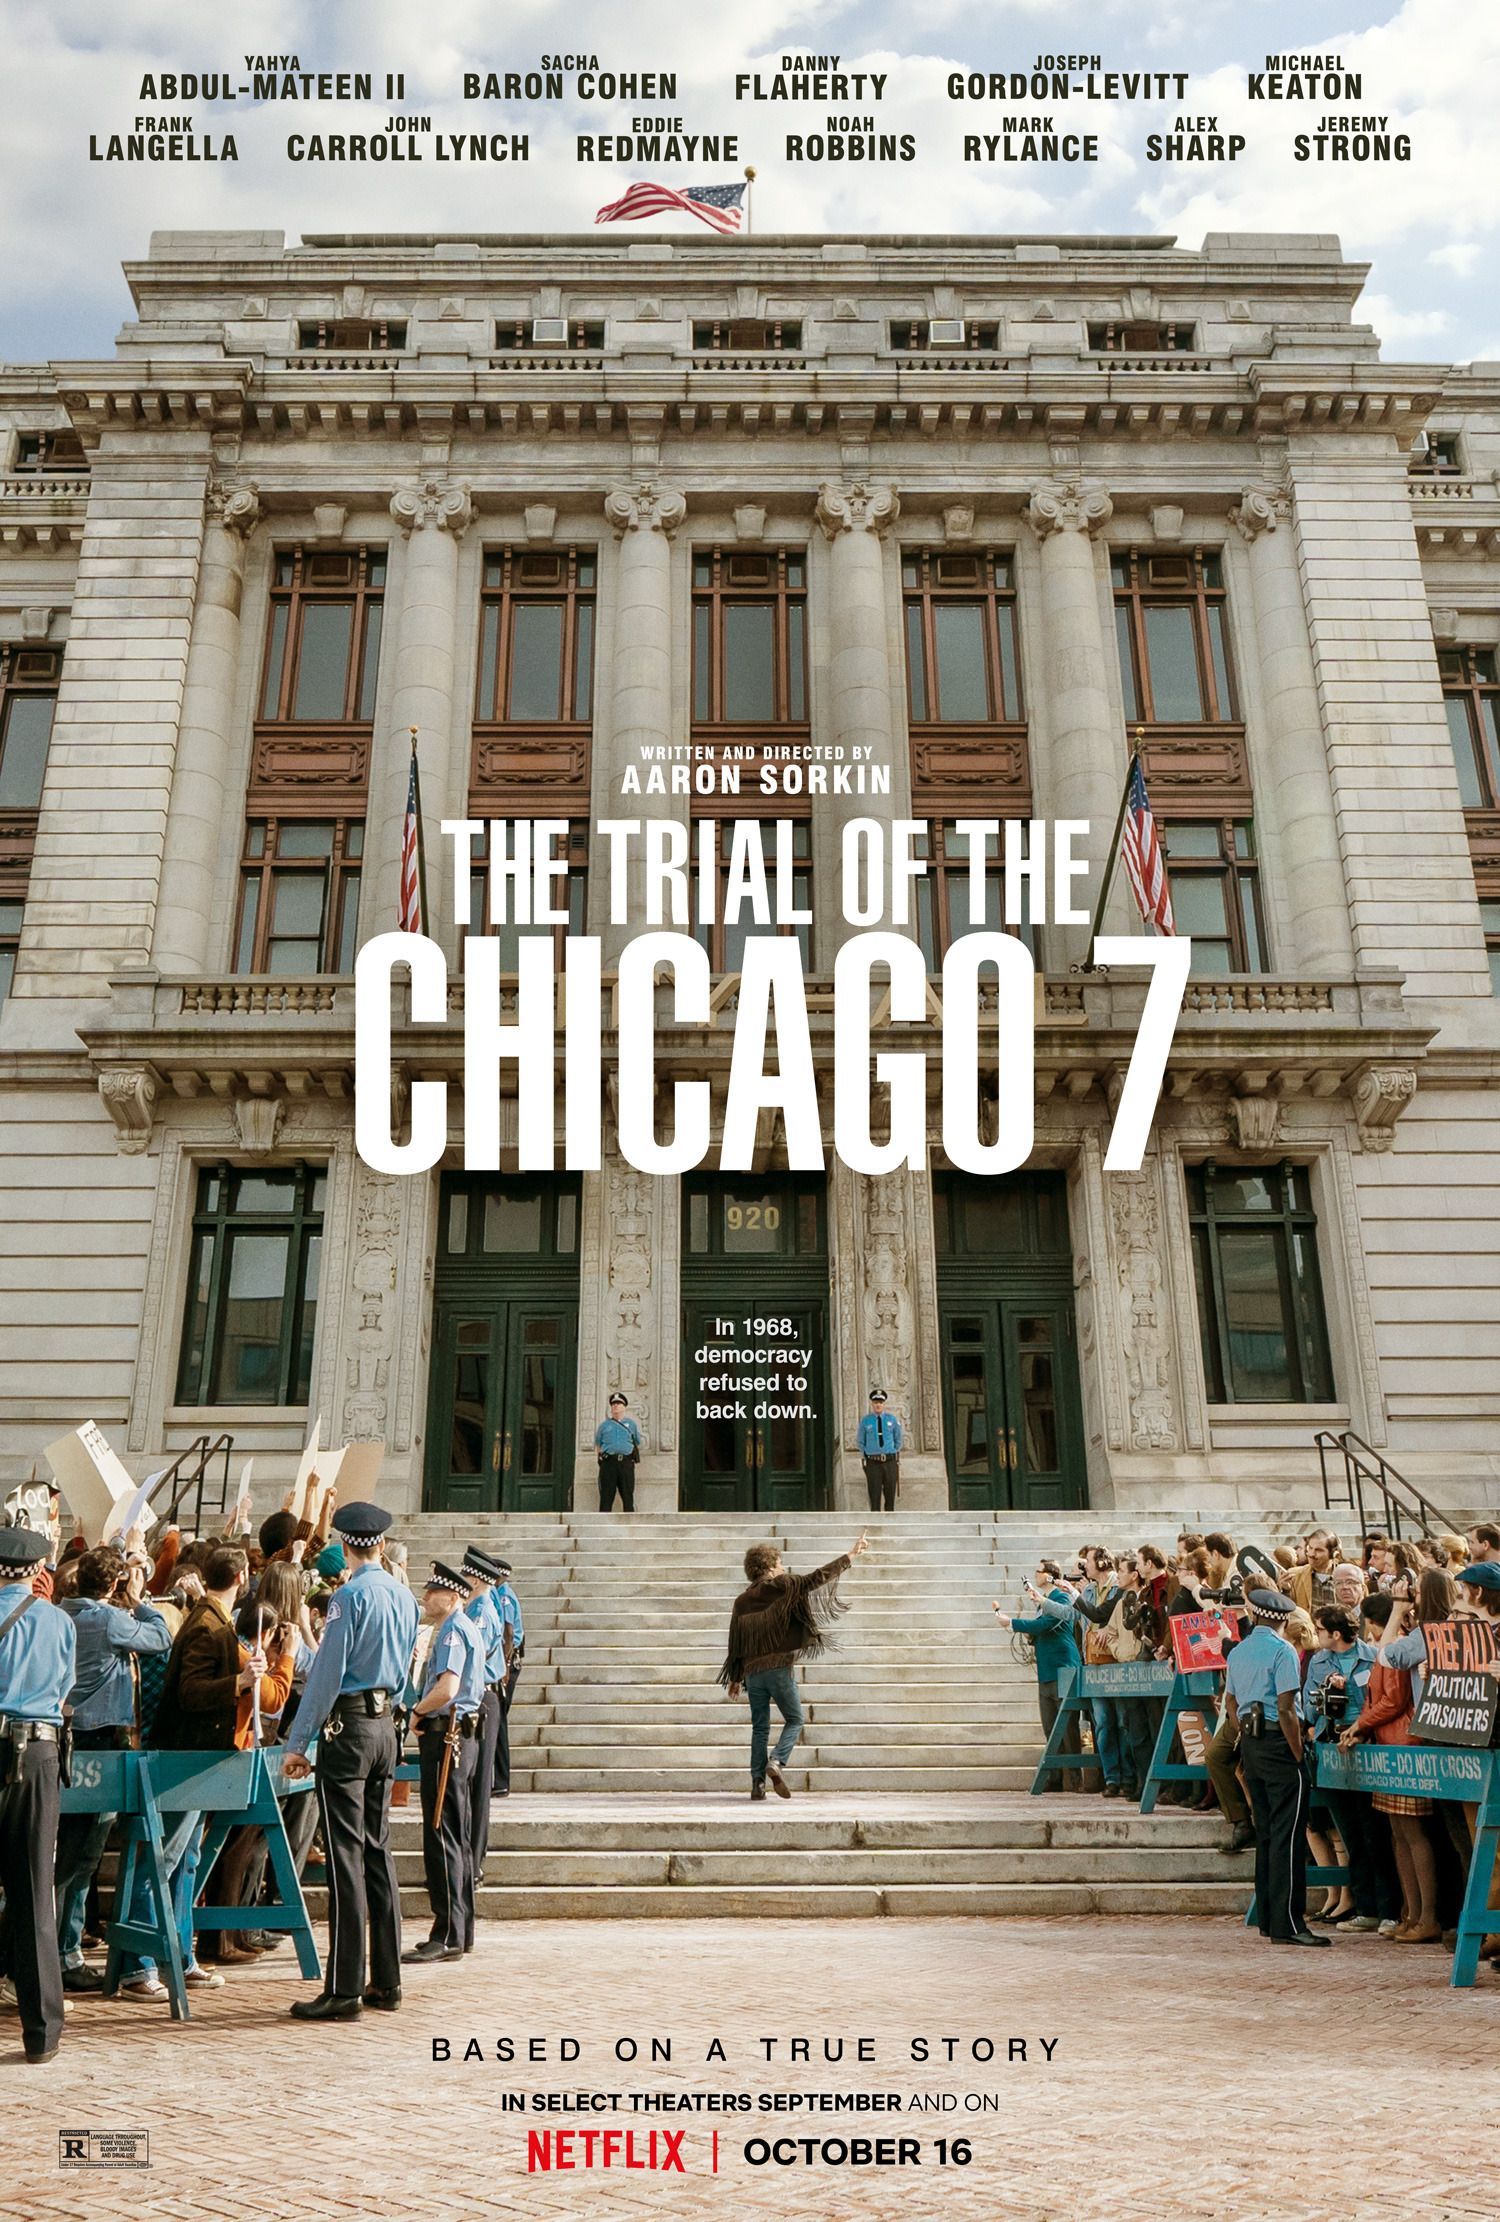 the-trial-of-the-chicago-7-movie-poster.jpg